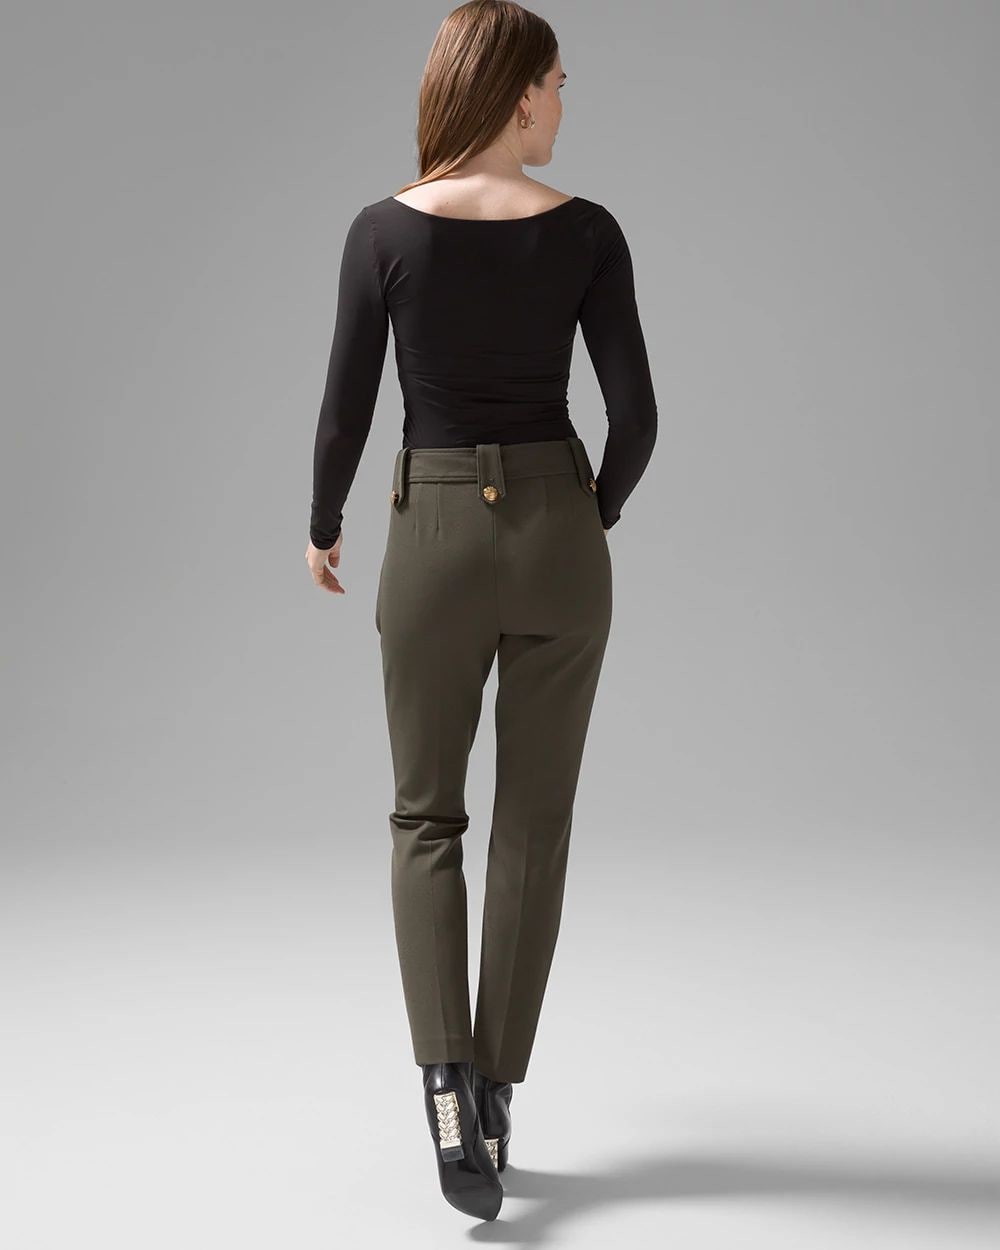 Petite WHBM® Jolie Button Straight Lux Stretch Pant click to view larger image.